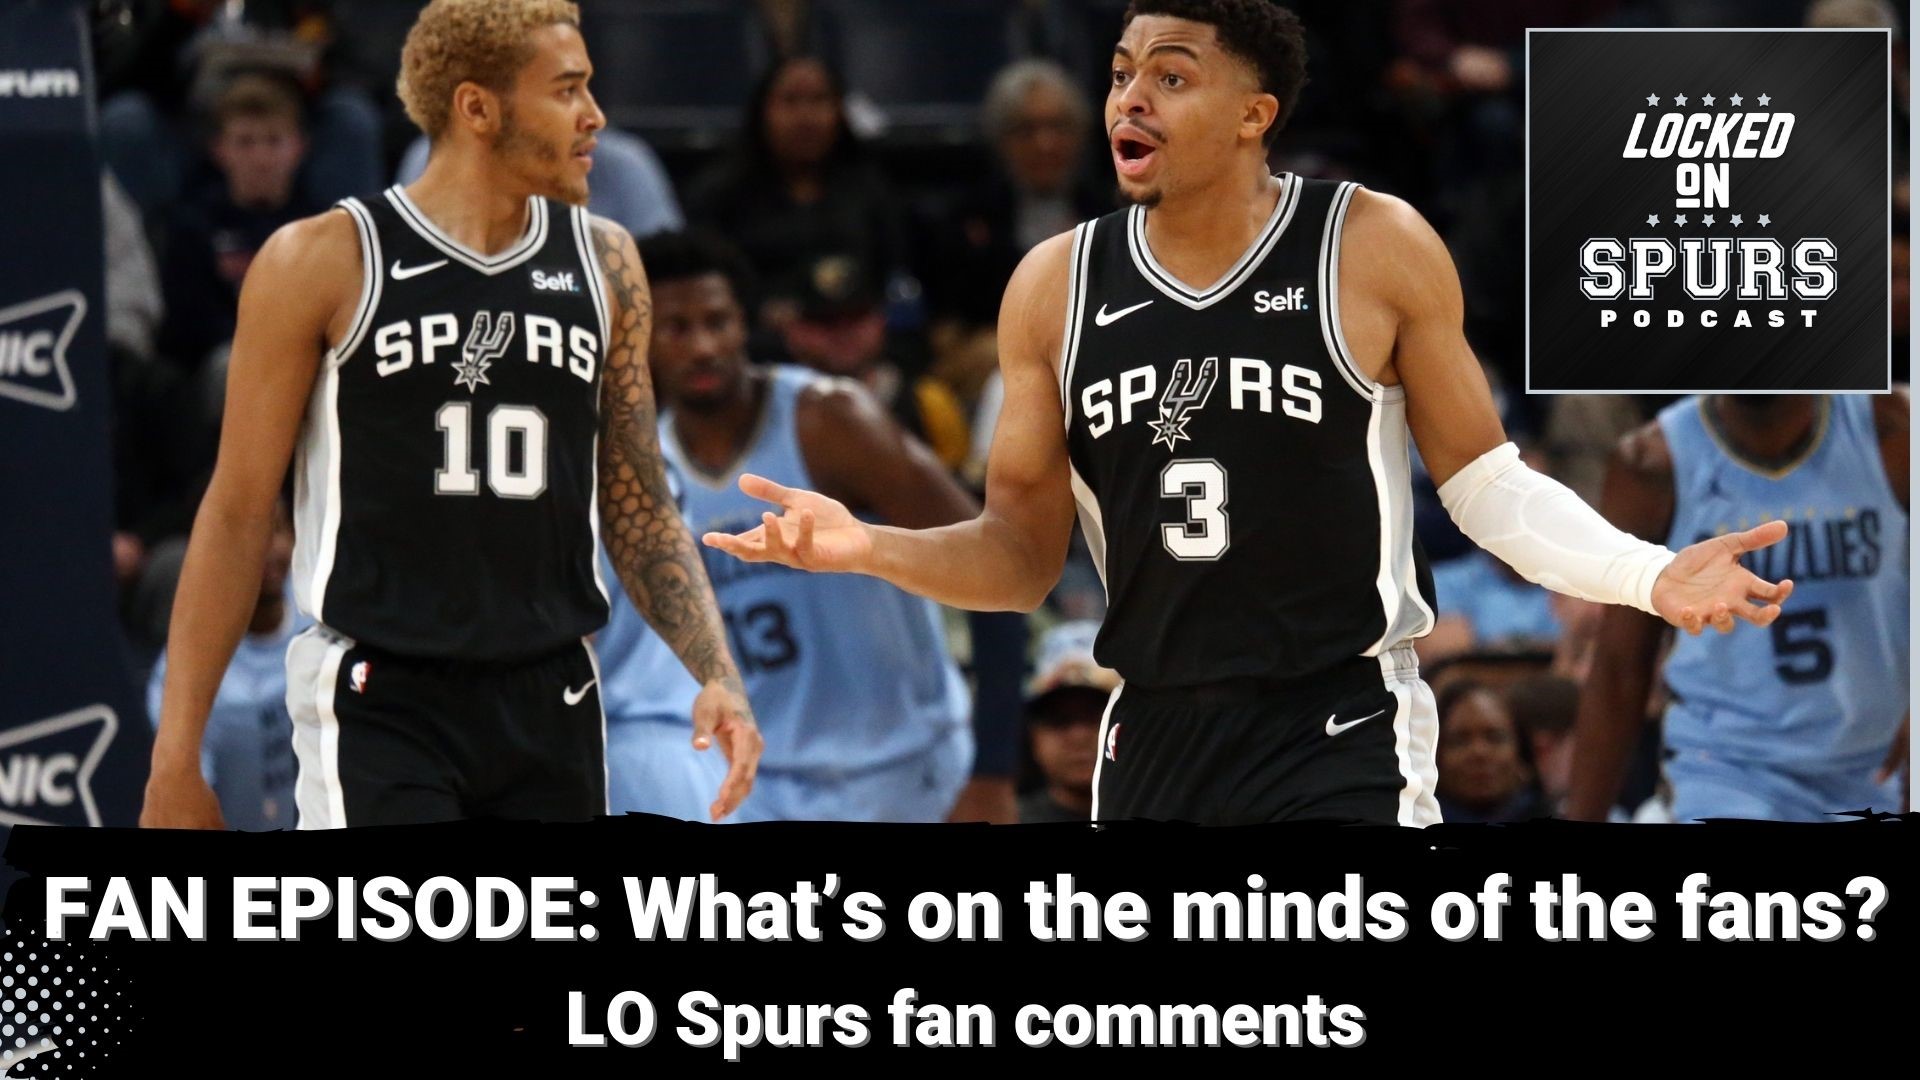 What are some things about the Spurs that are swirling among the fan base?